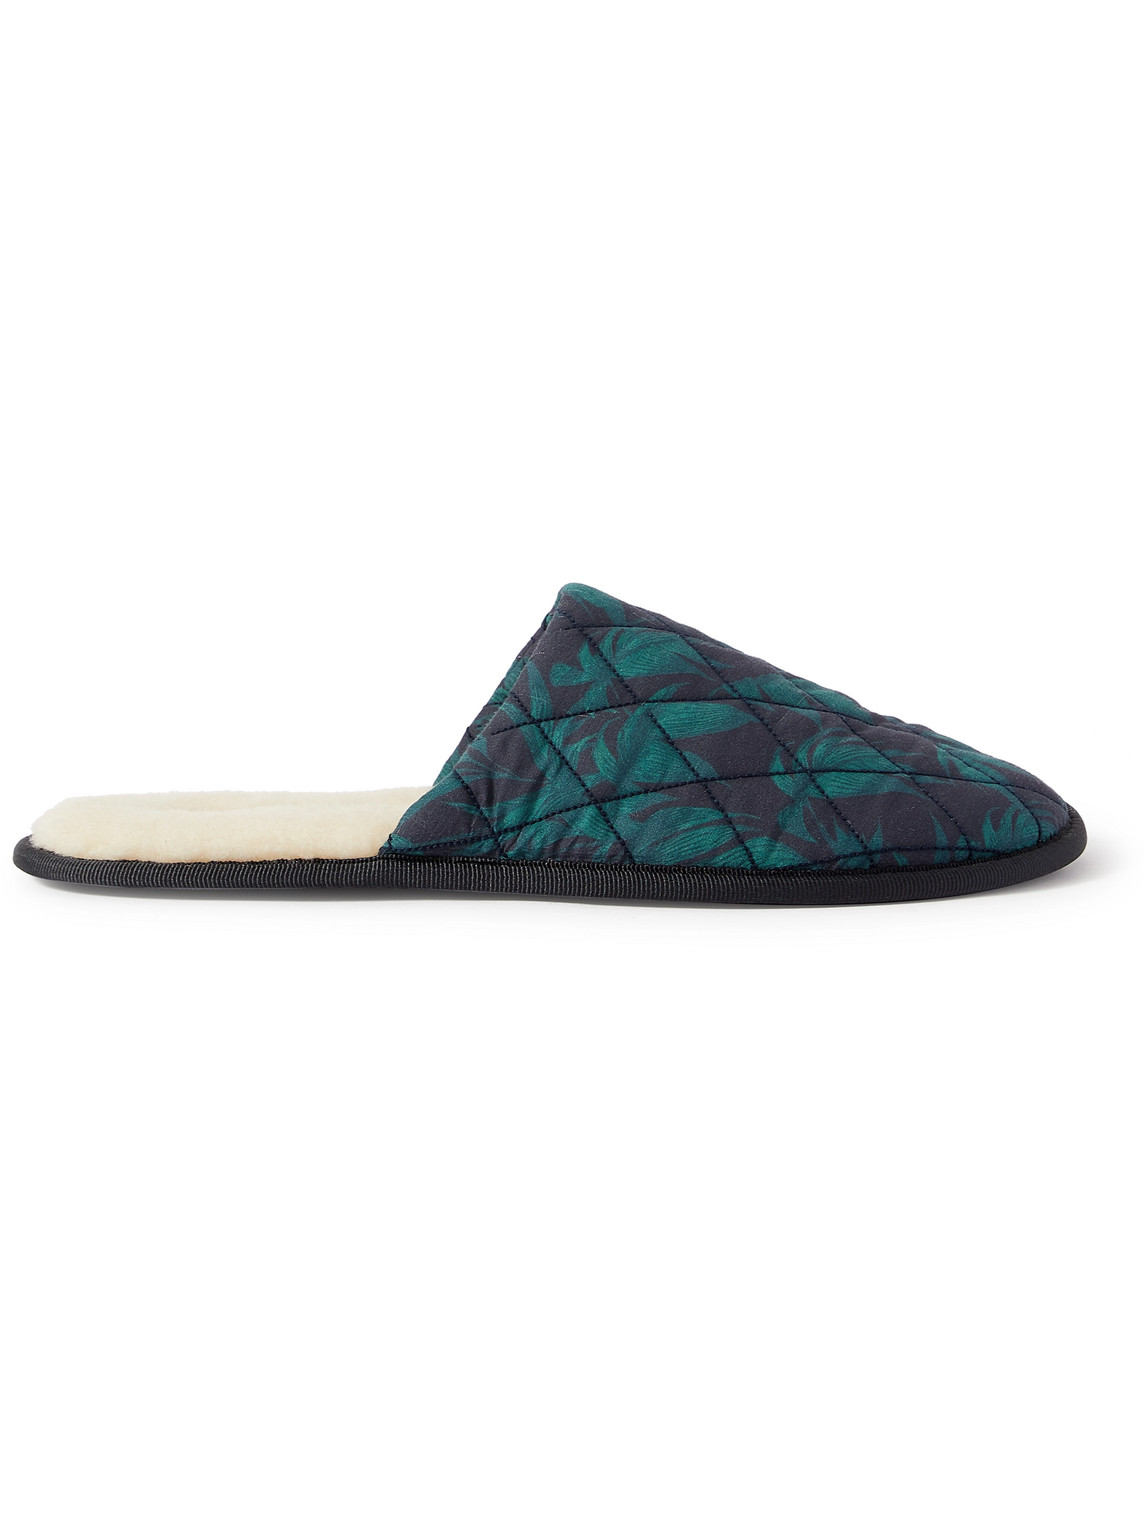 DESMOND & DEMPSEY BYRON WOOL-LINED QUILTED PRINTED COTTON SLIPPERS